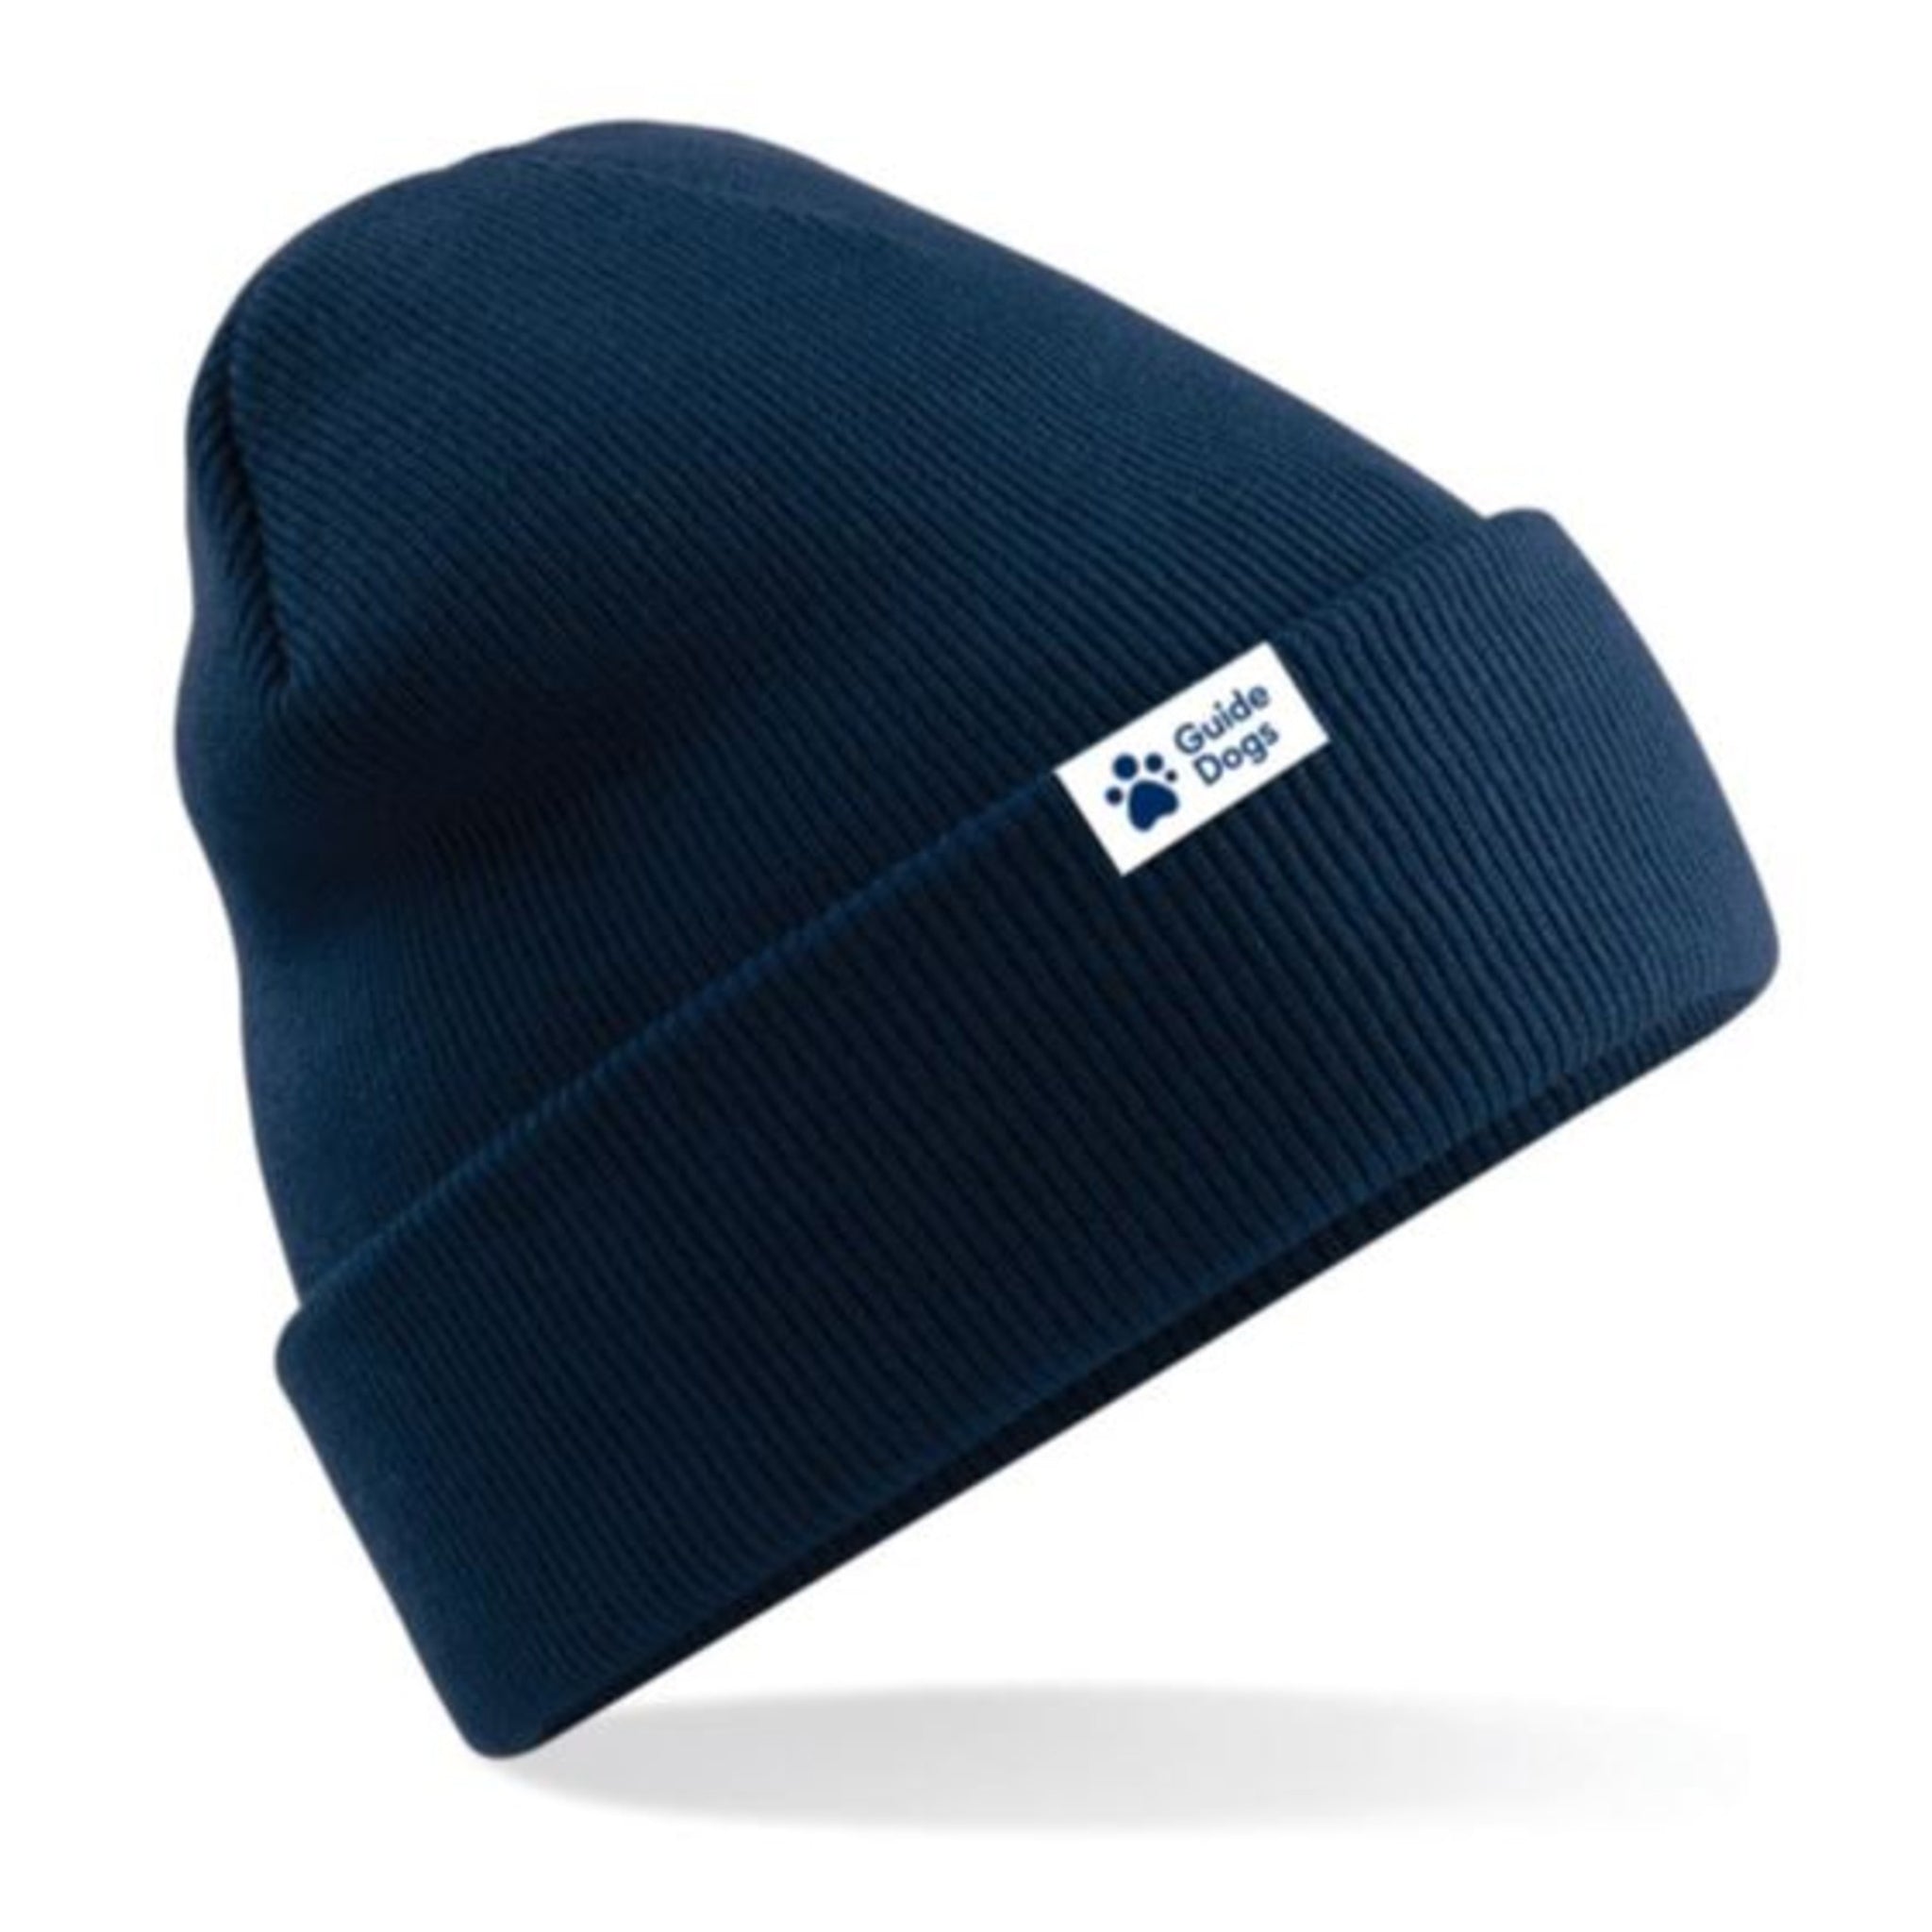 A close up of the navy blue Guide Dogs beanie hat with the Guide Dogs logo on the turn up section.